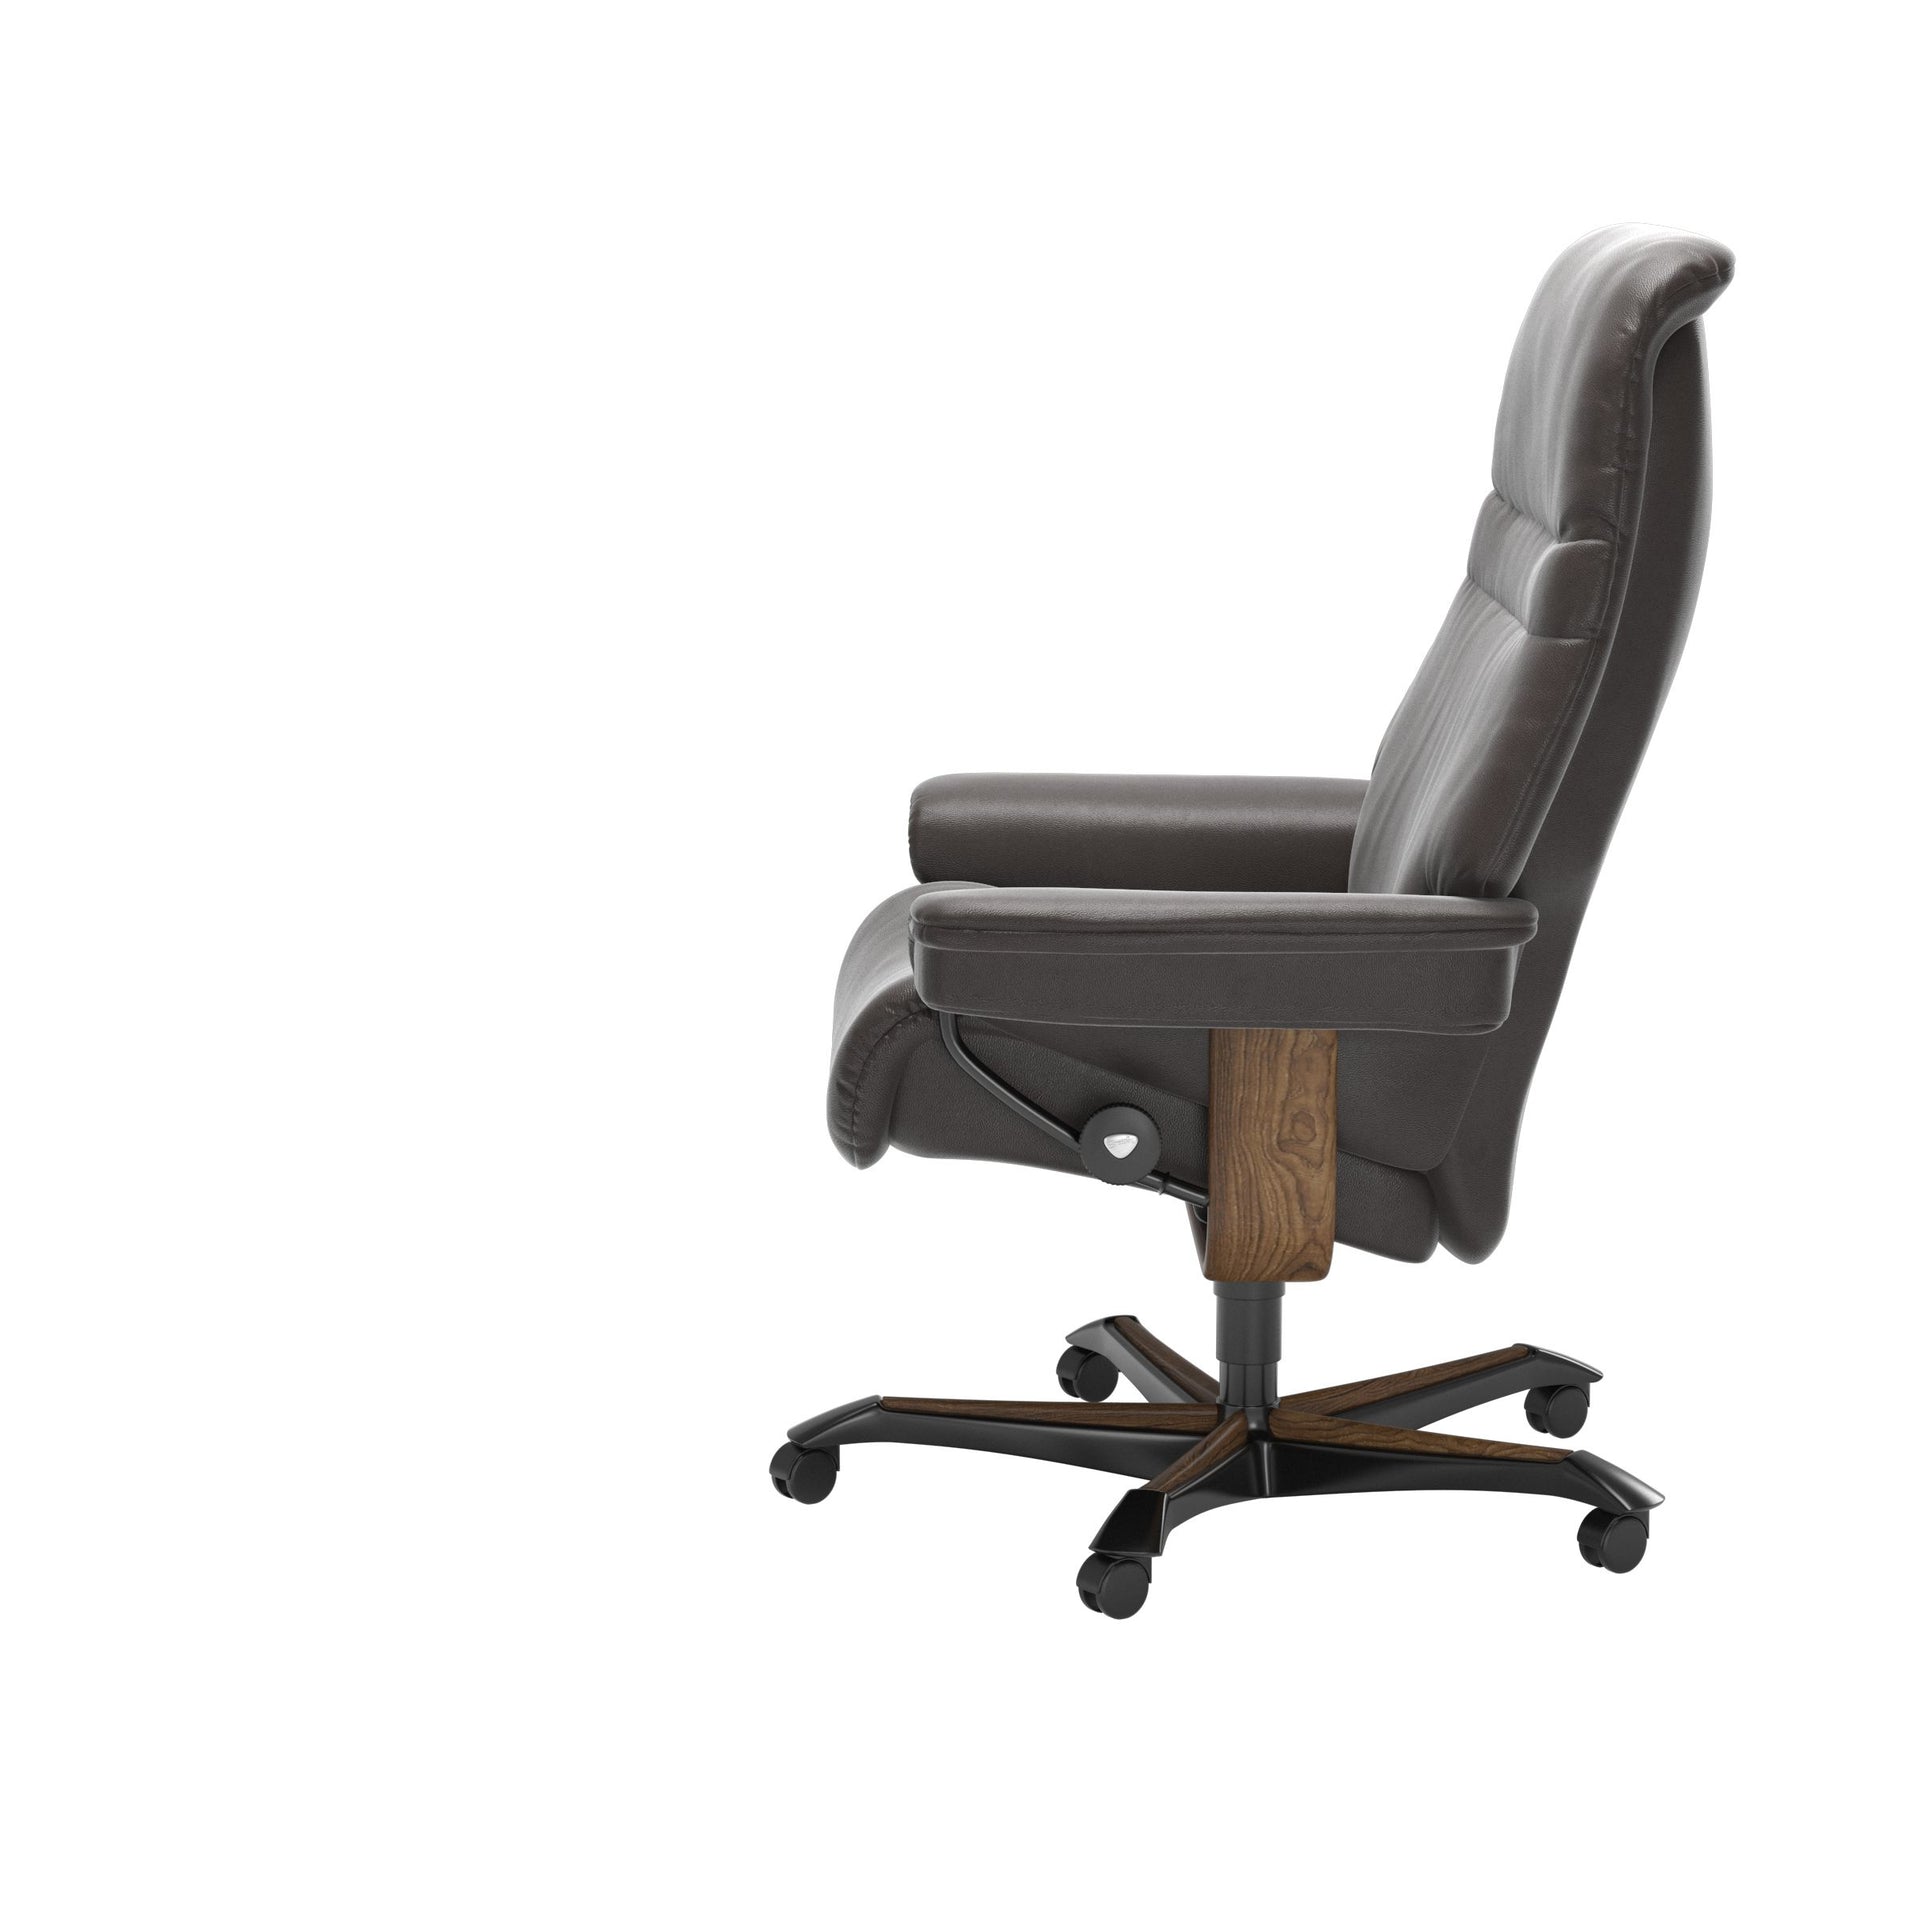 Stressless Sunrise Office Chair side view